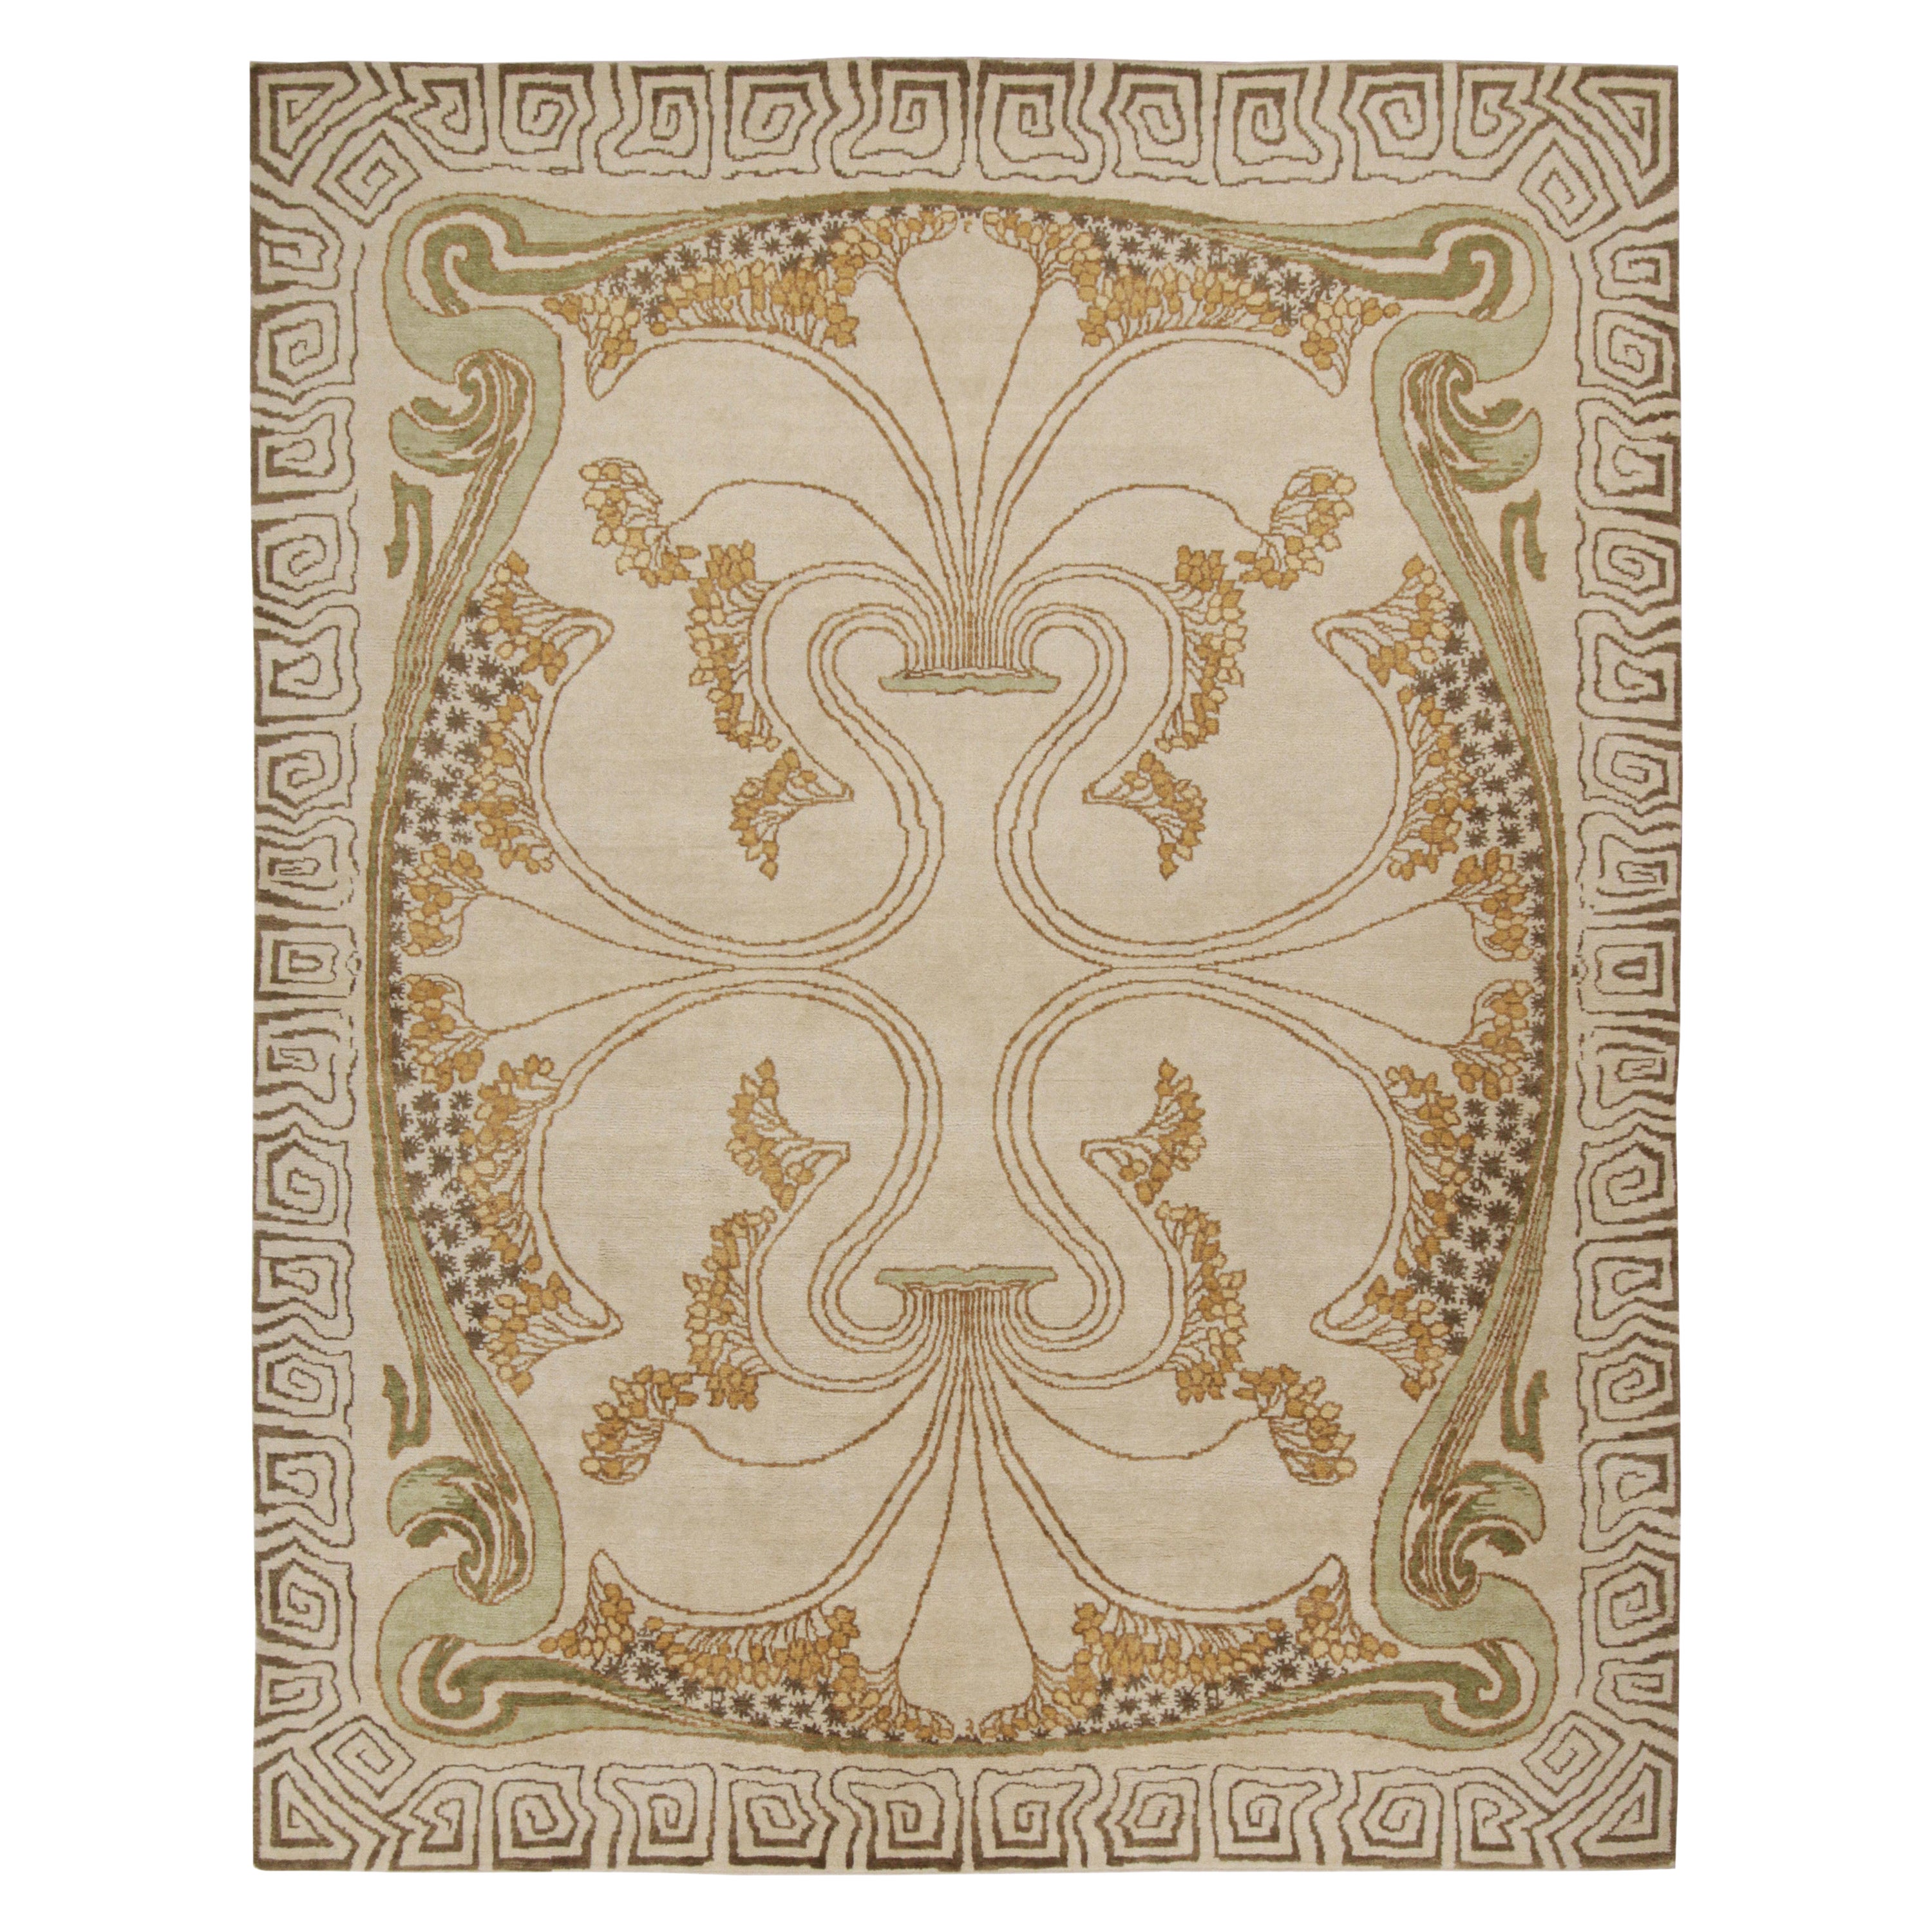 Rug & Kilim’s French Style Art Deco Rug in Cream & Gold Geometric Patterns For Sale